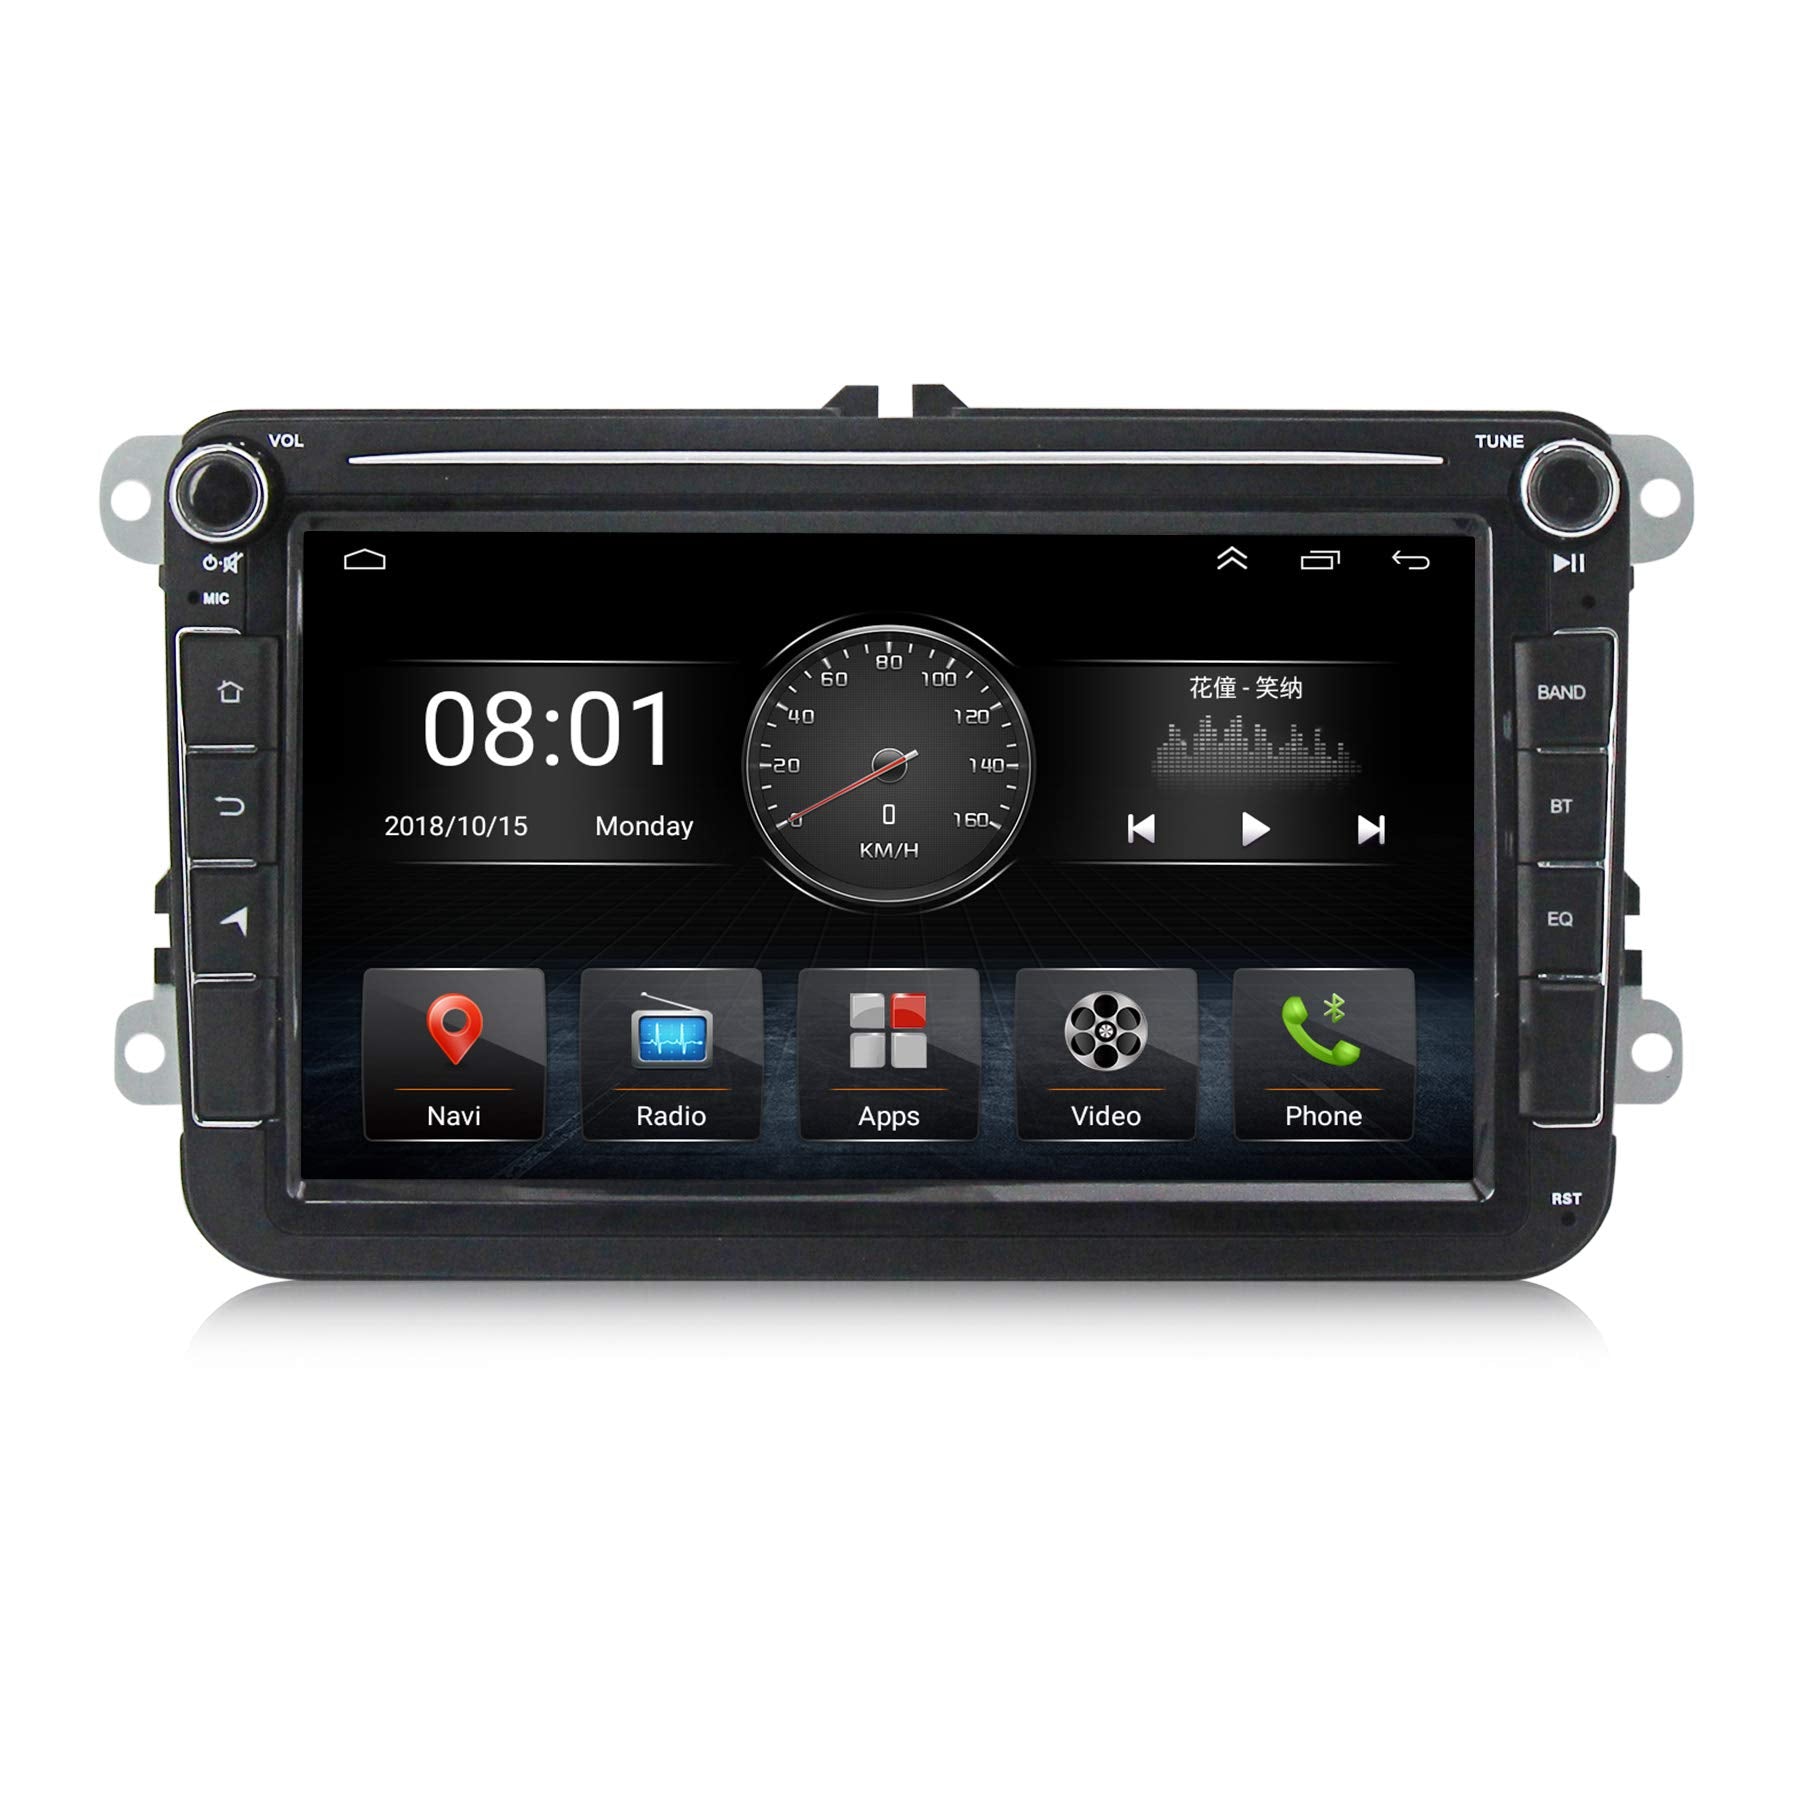 VW Navigator Android 2/32GB 4 core